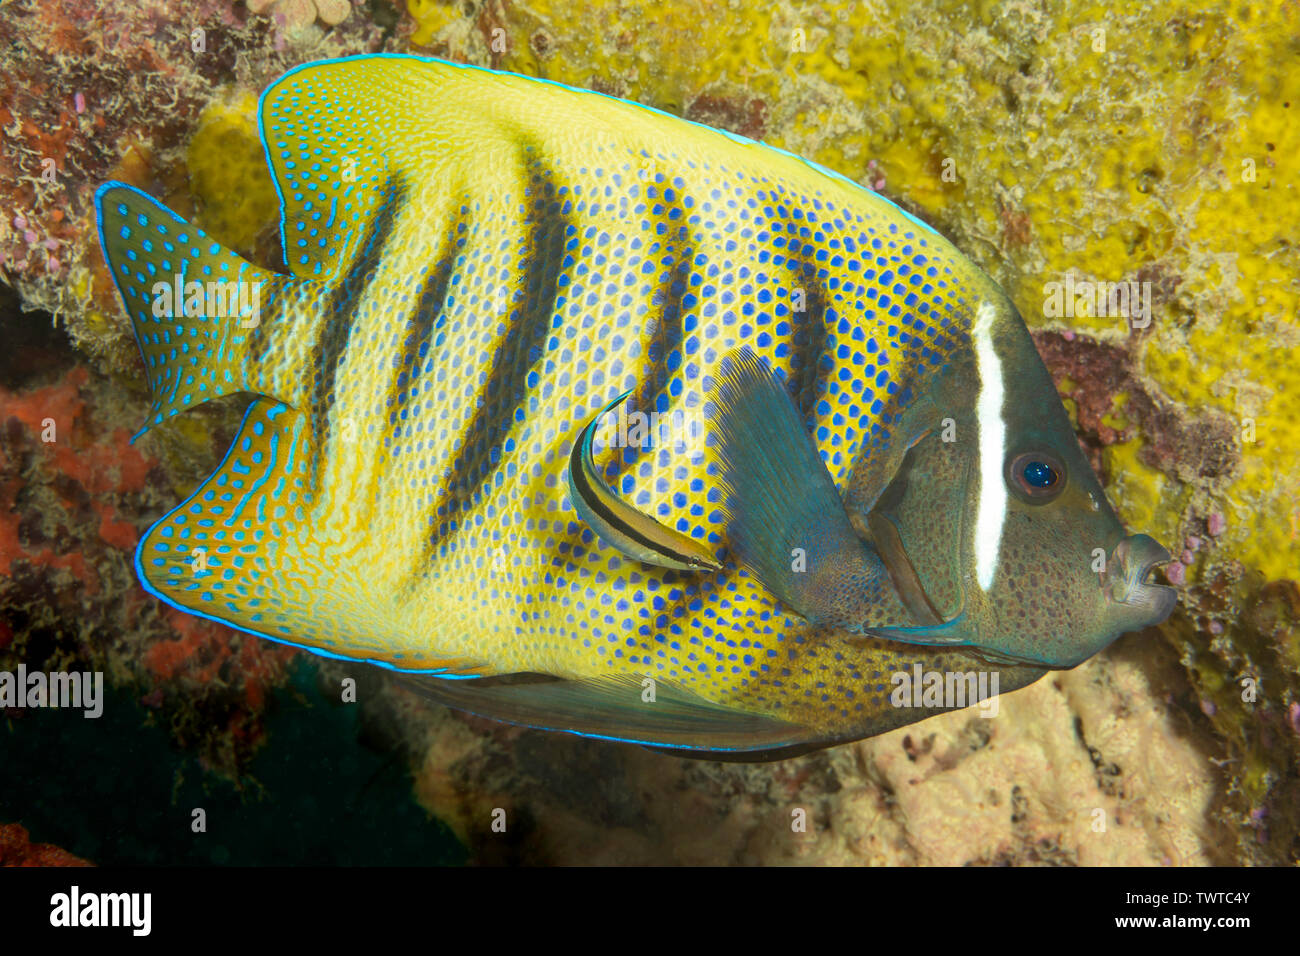 This six-banded Angelfish, Holacanthus sexstriatus, is being carefully checked out by a cleaner wrasse, on a reef off the island of Yap, Micronesia. Stock Photo